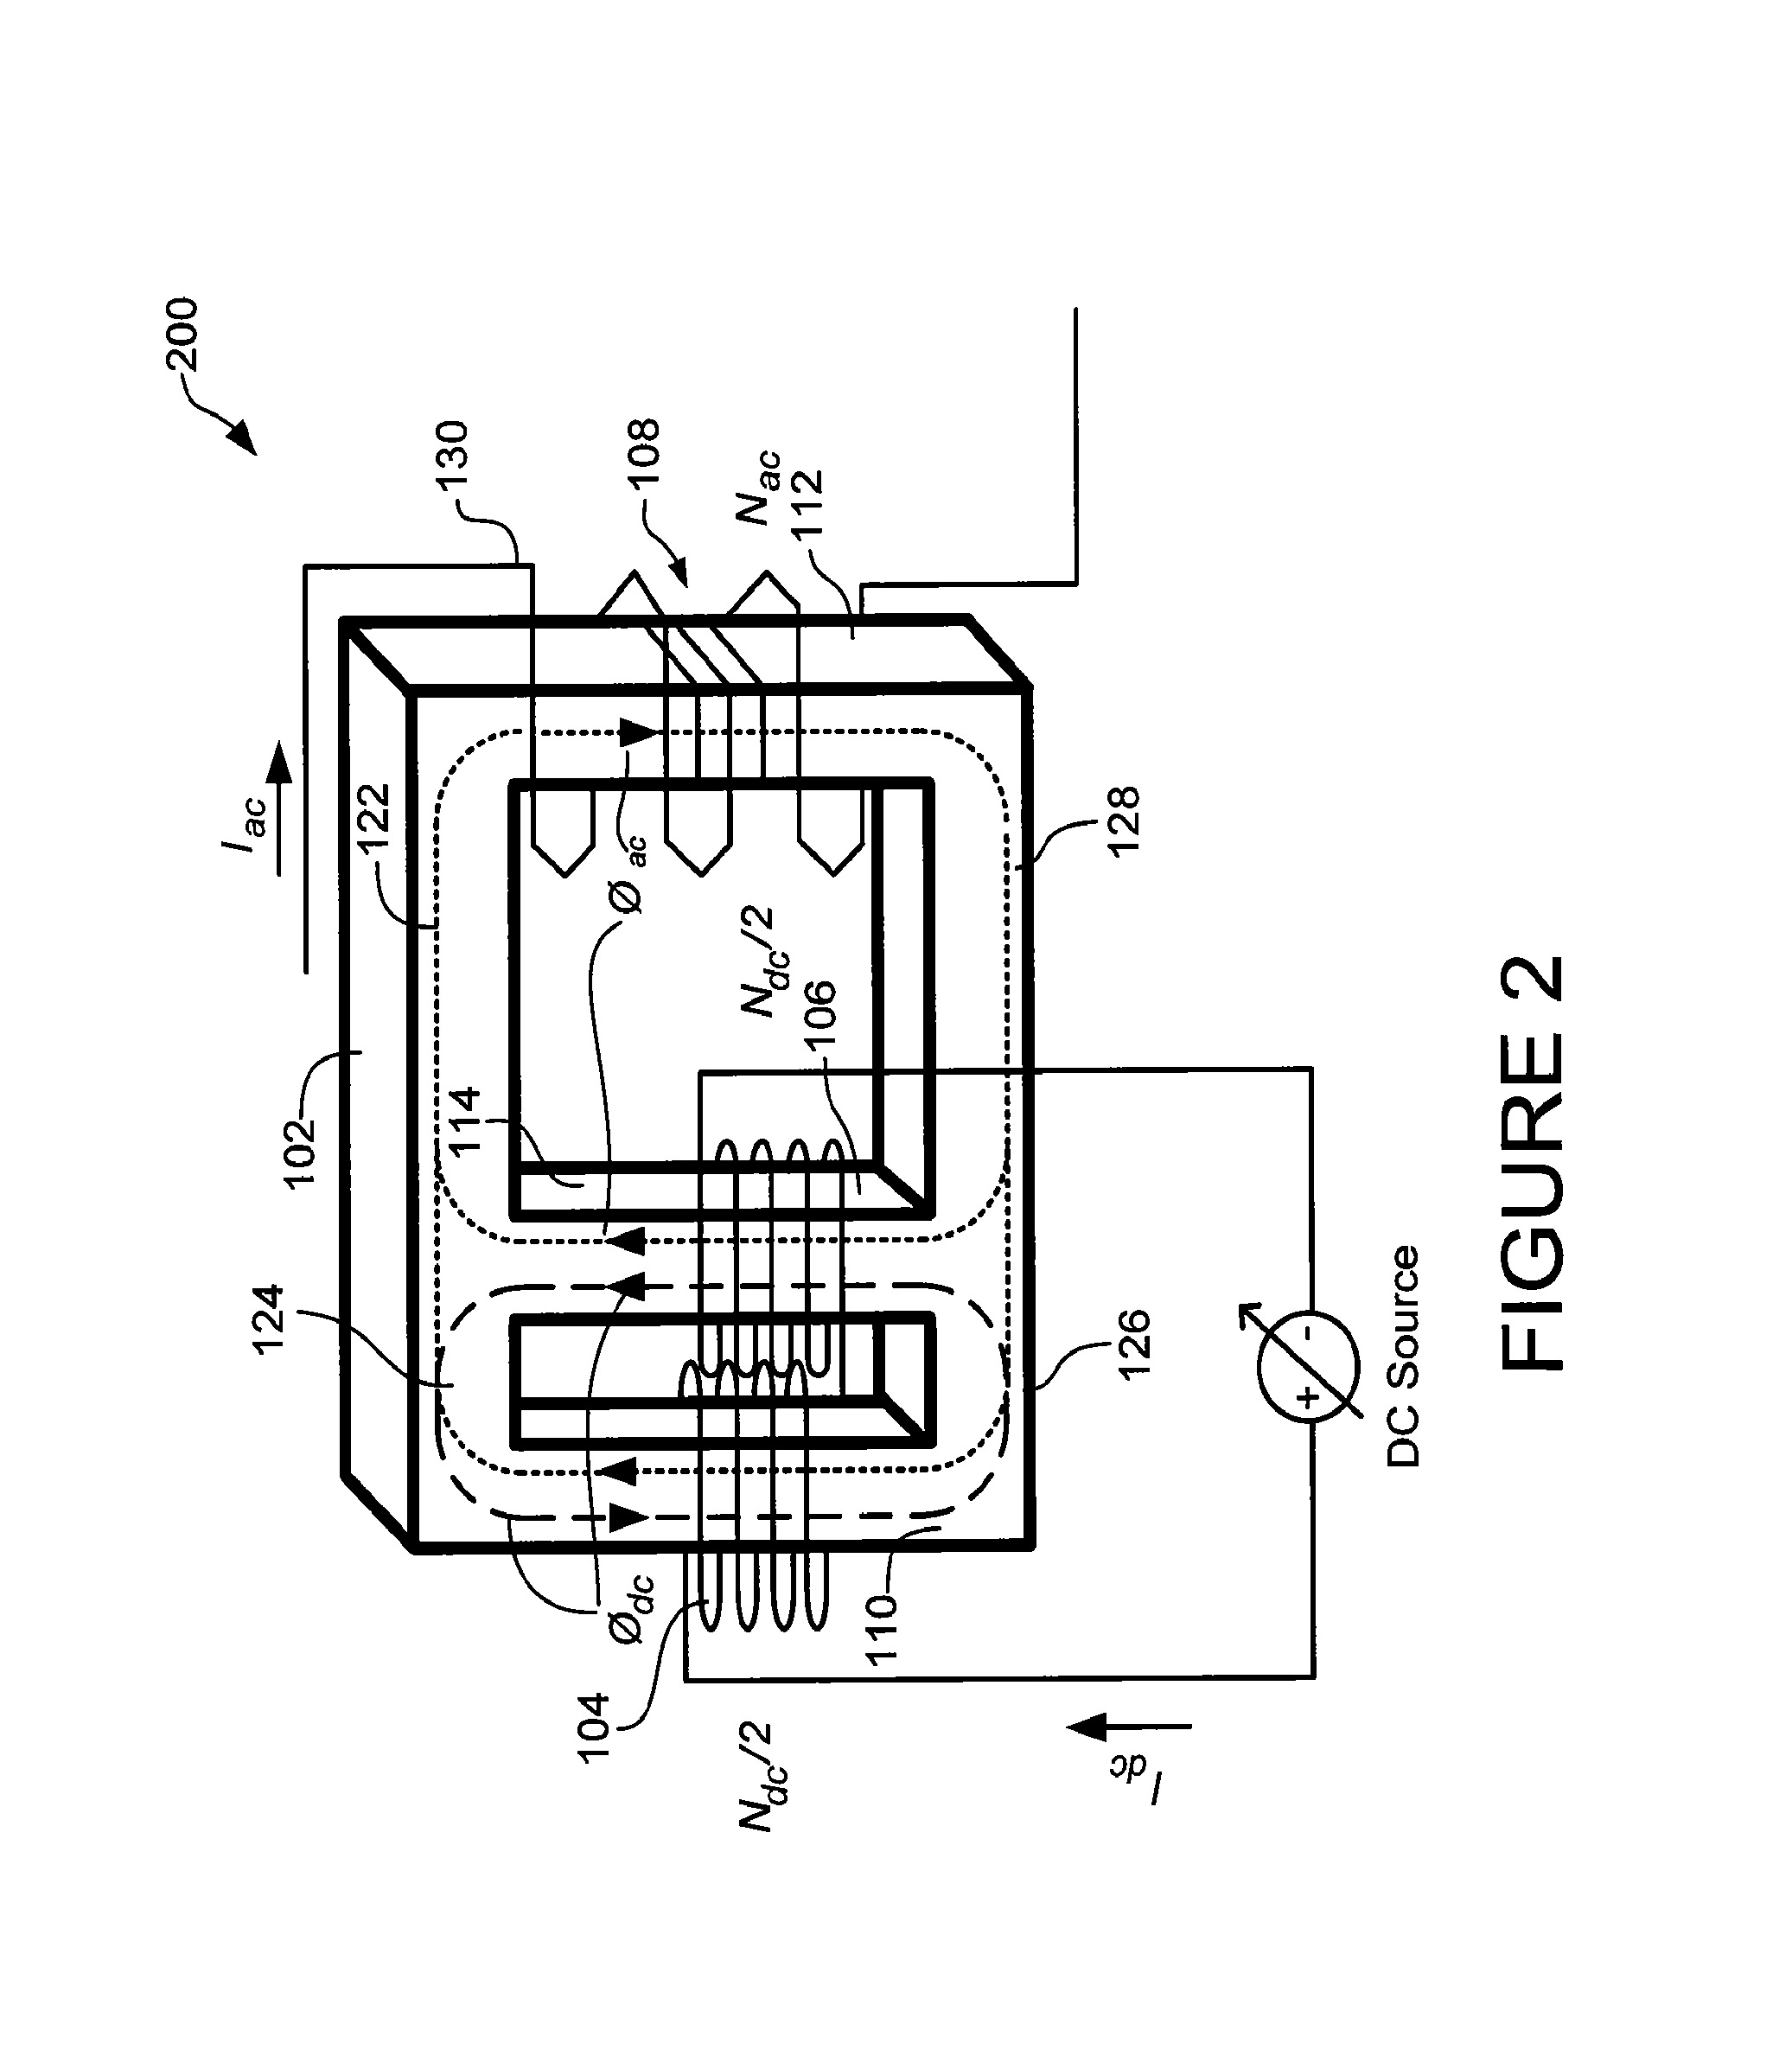 Power flow control using distributed saturable reactors